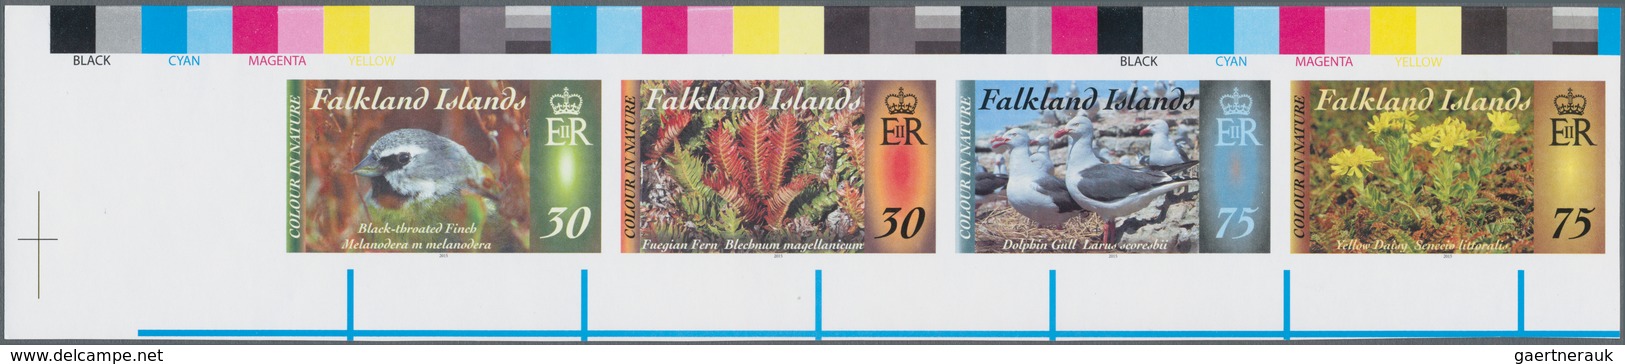 Falklandinseln: 2015, Colour In Nature, IMPERFORATE Proof Strip Of Four With Traffic Lights At Selve - Falklandinseln